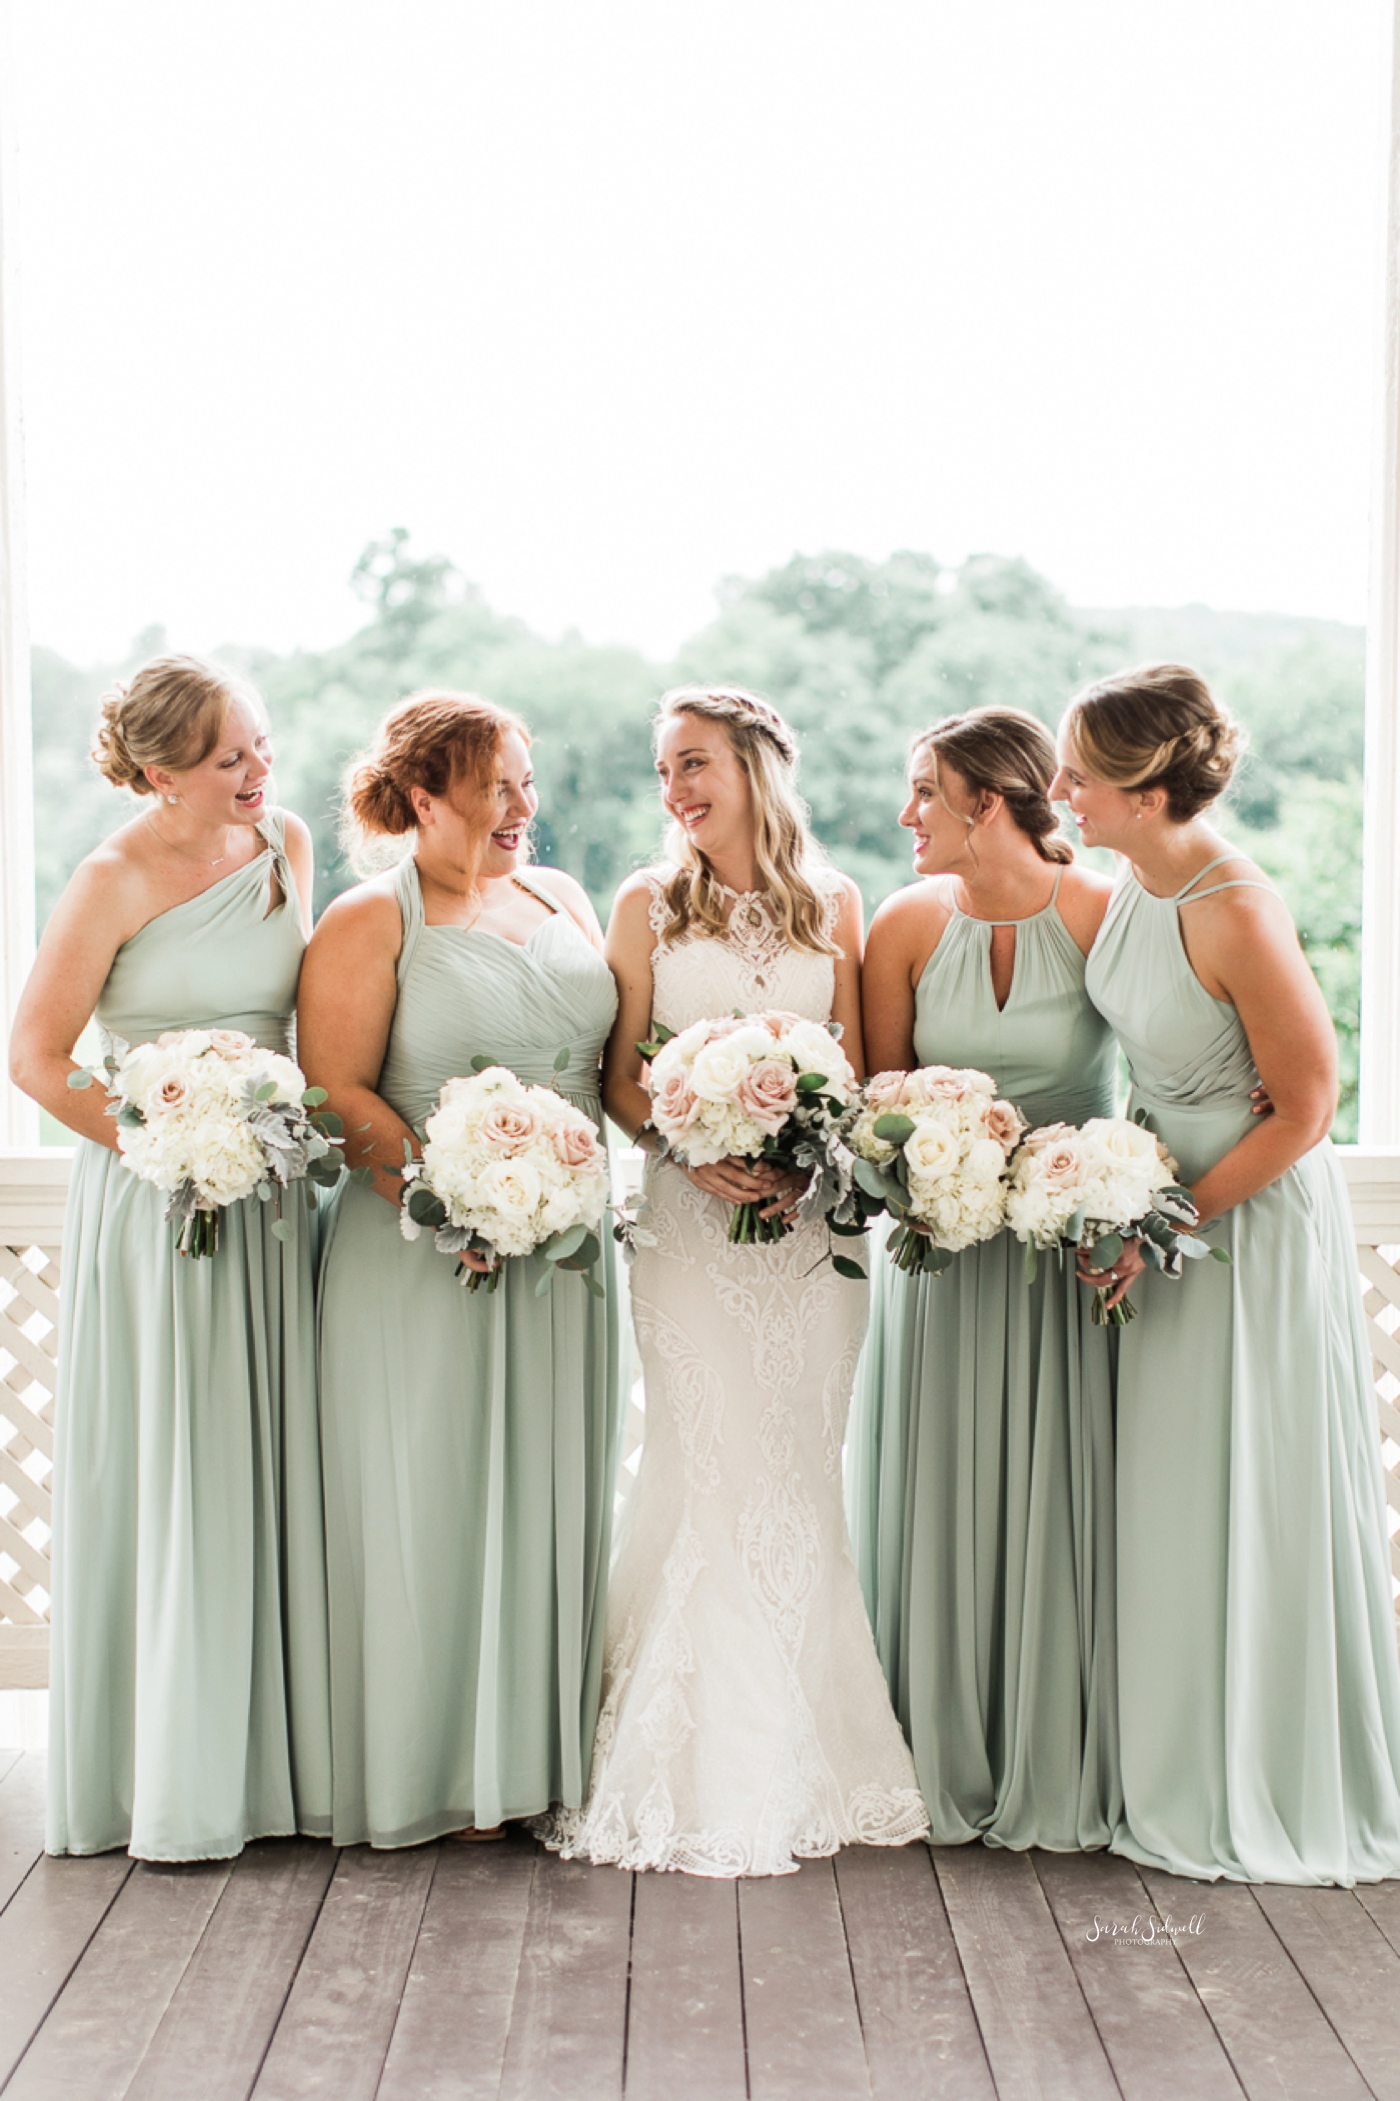 A bridal party surrounds the bride after the wedding. 